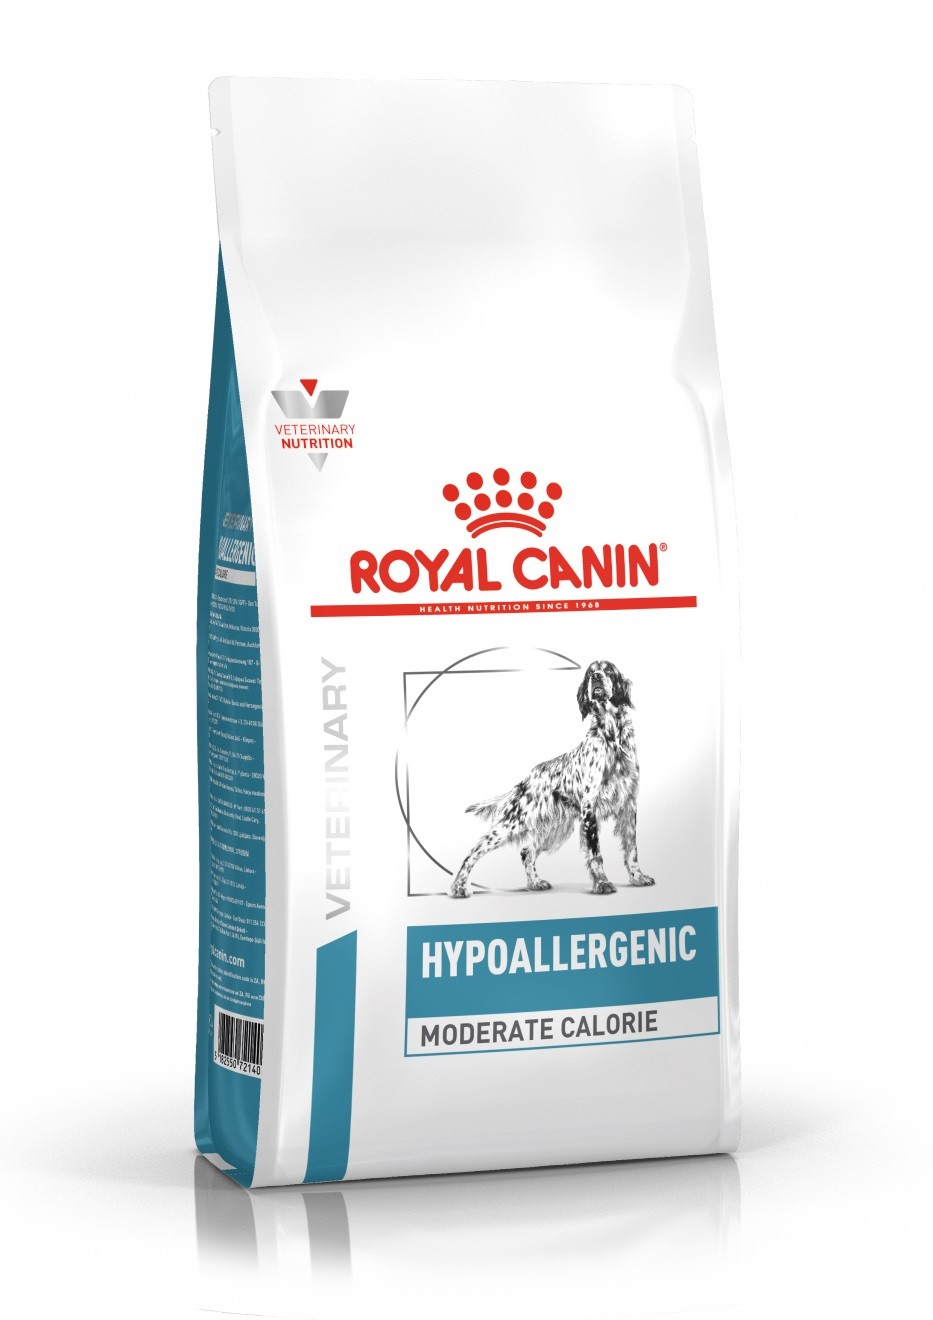 Royal Canin Veterinary Diet Hypoallergenic Moderate Calorie HME23 pour chien